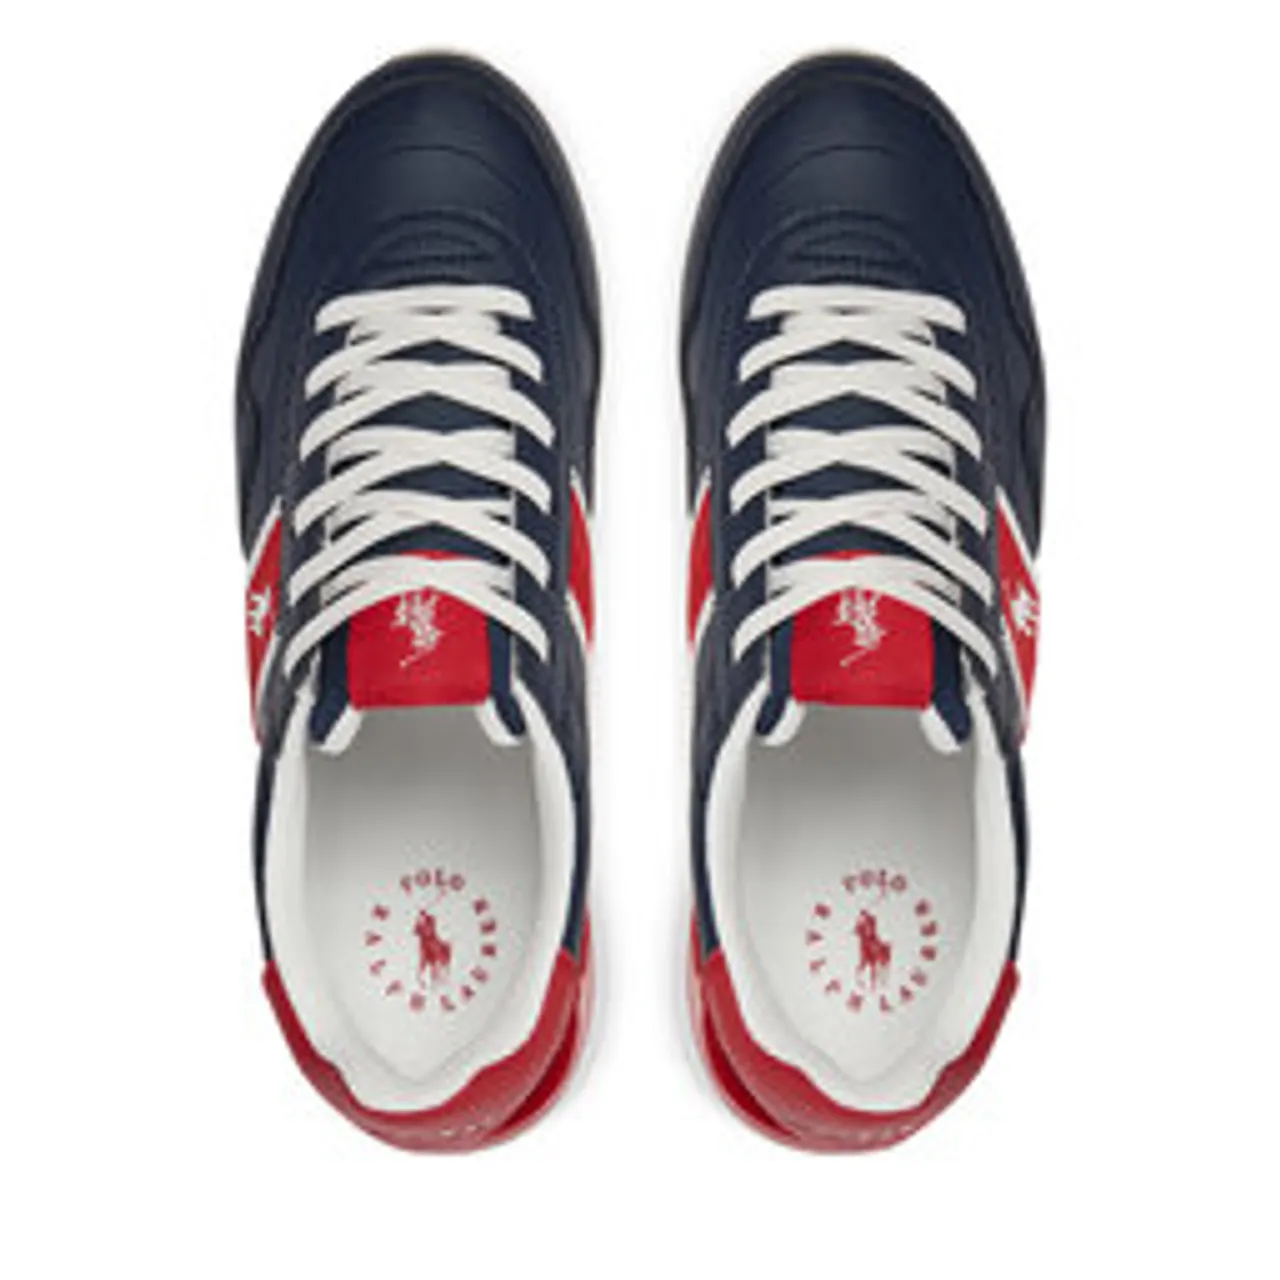 Sneakers Polo Ralph Lauren RL00606410 J Navy Tumbled/Red W/ White Pp